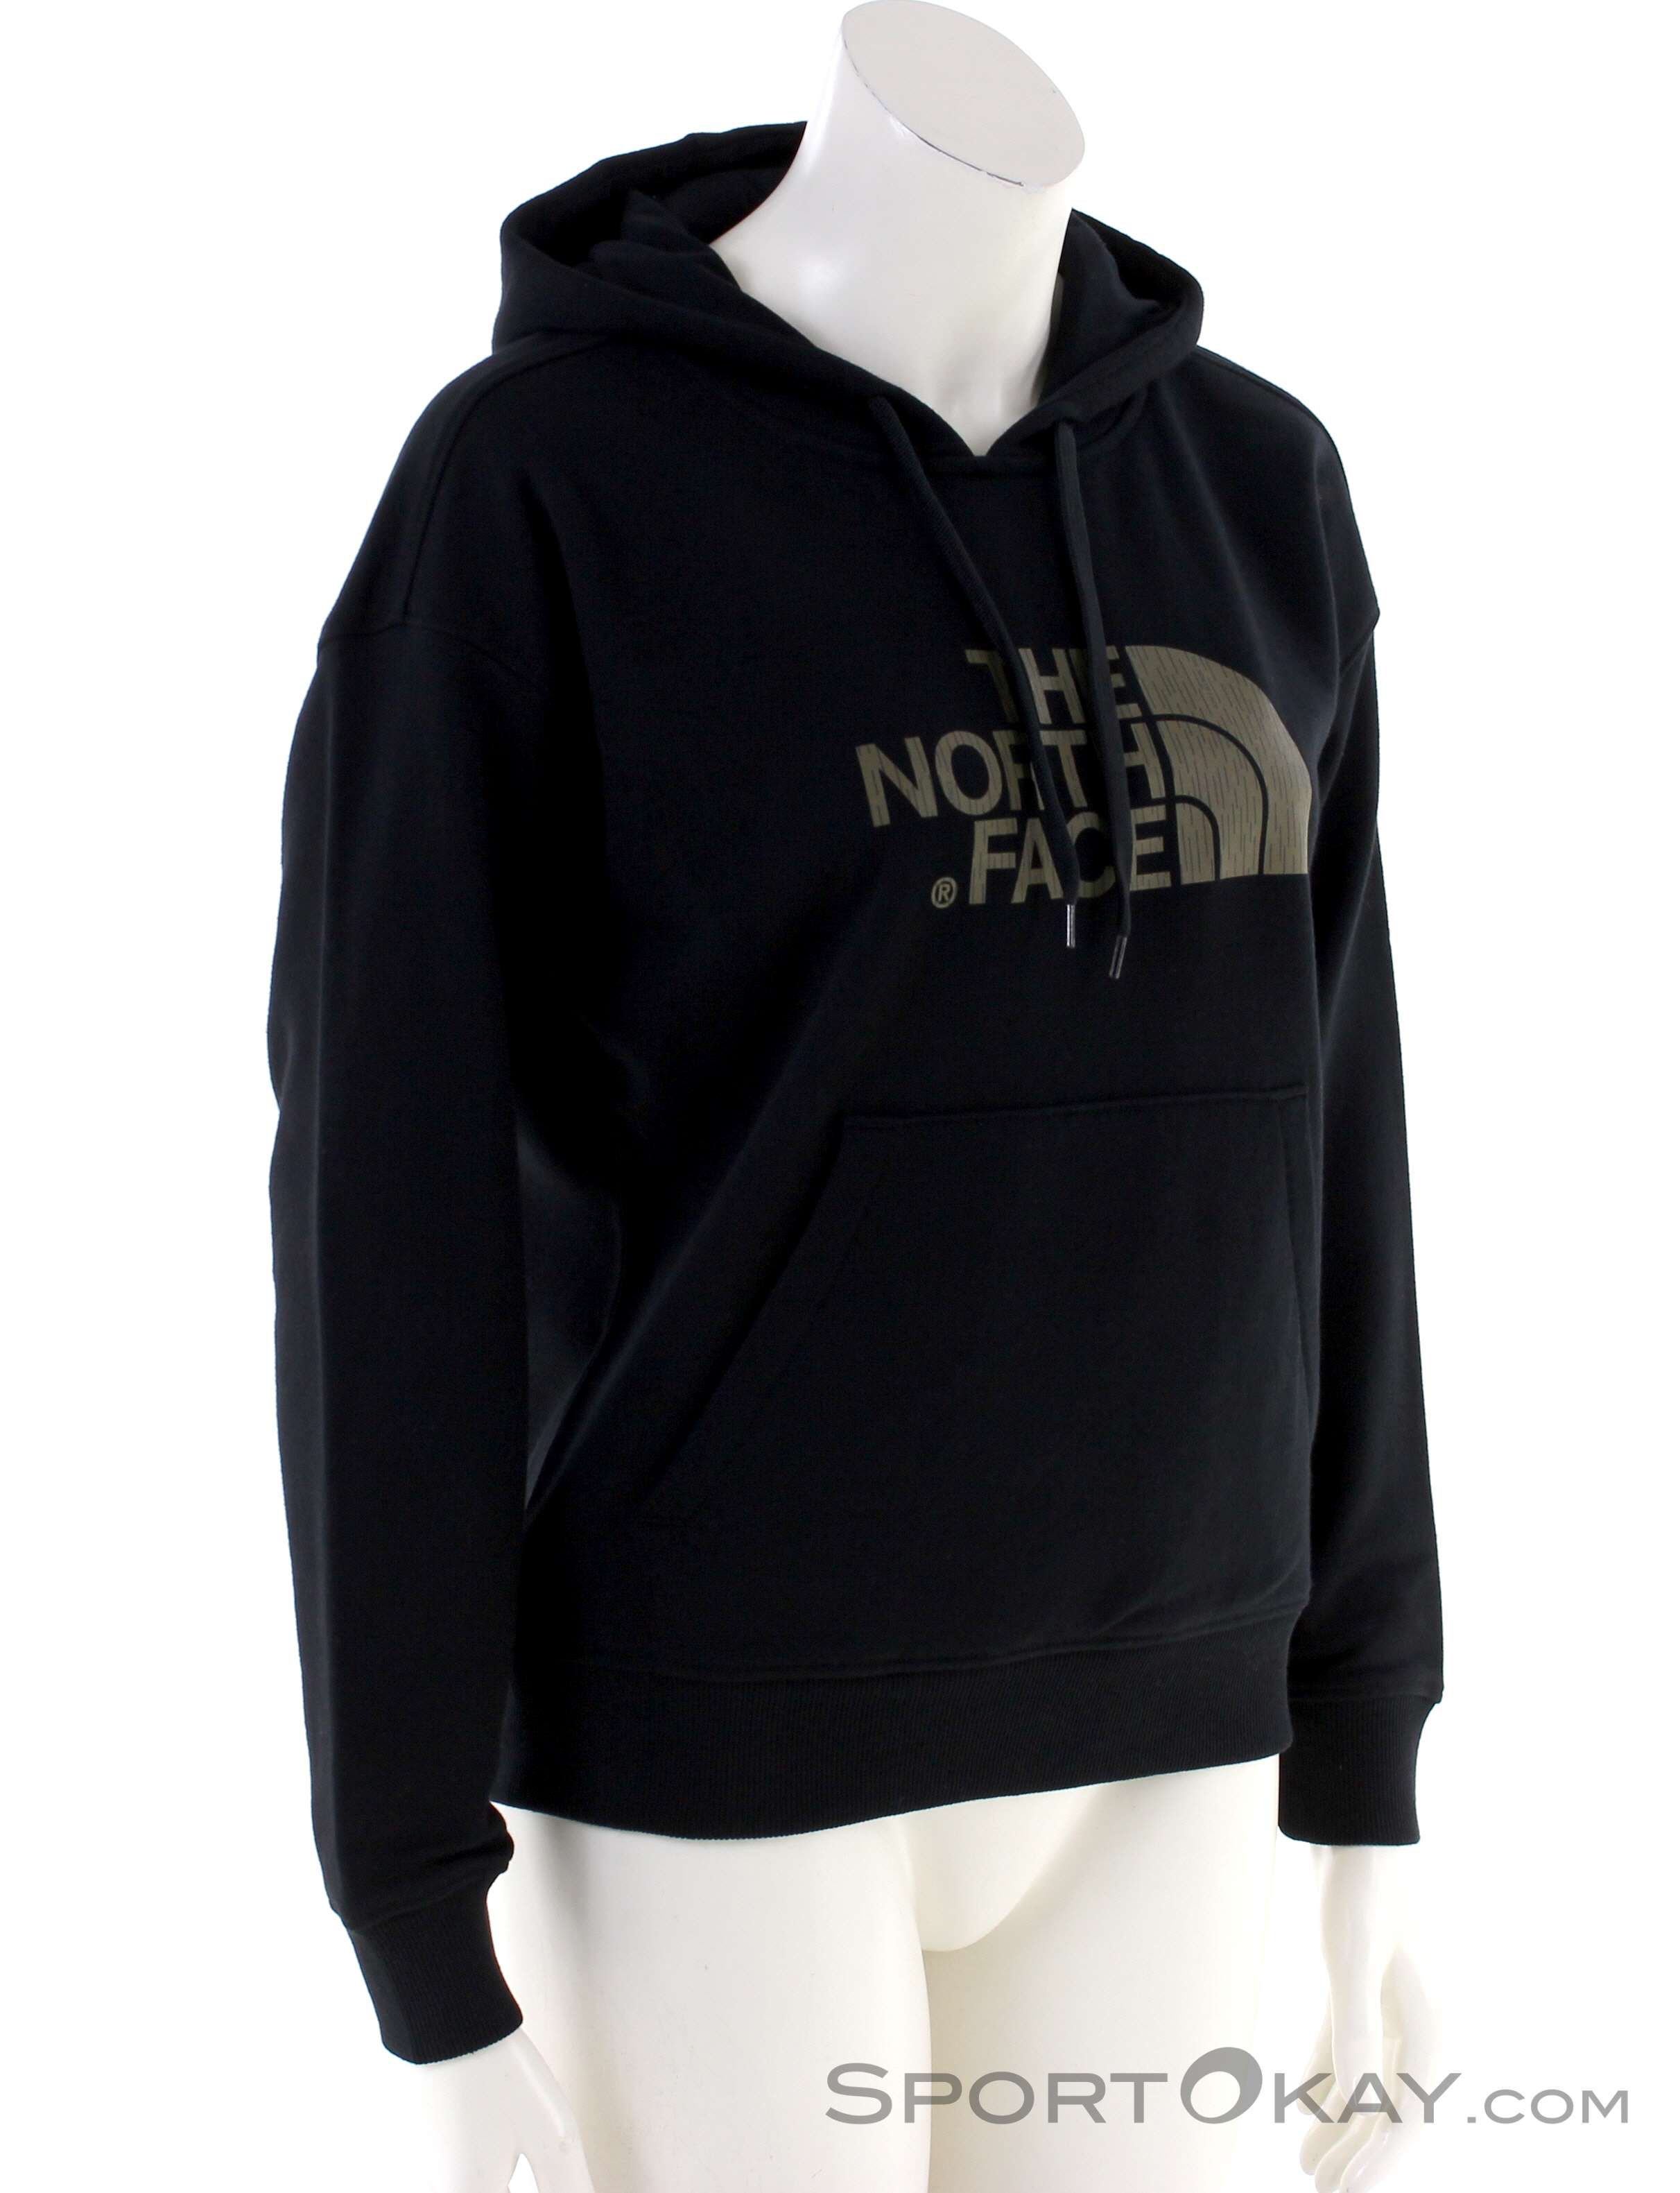 north face sweater women's